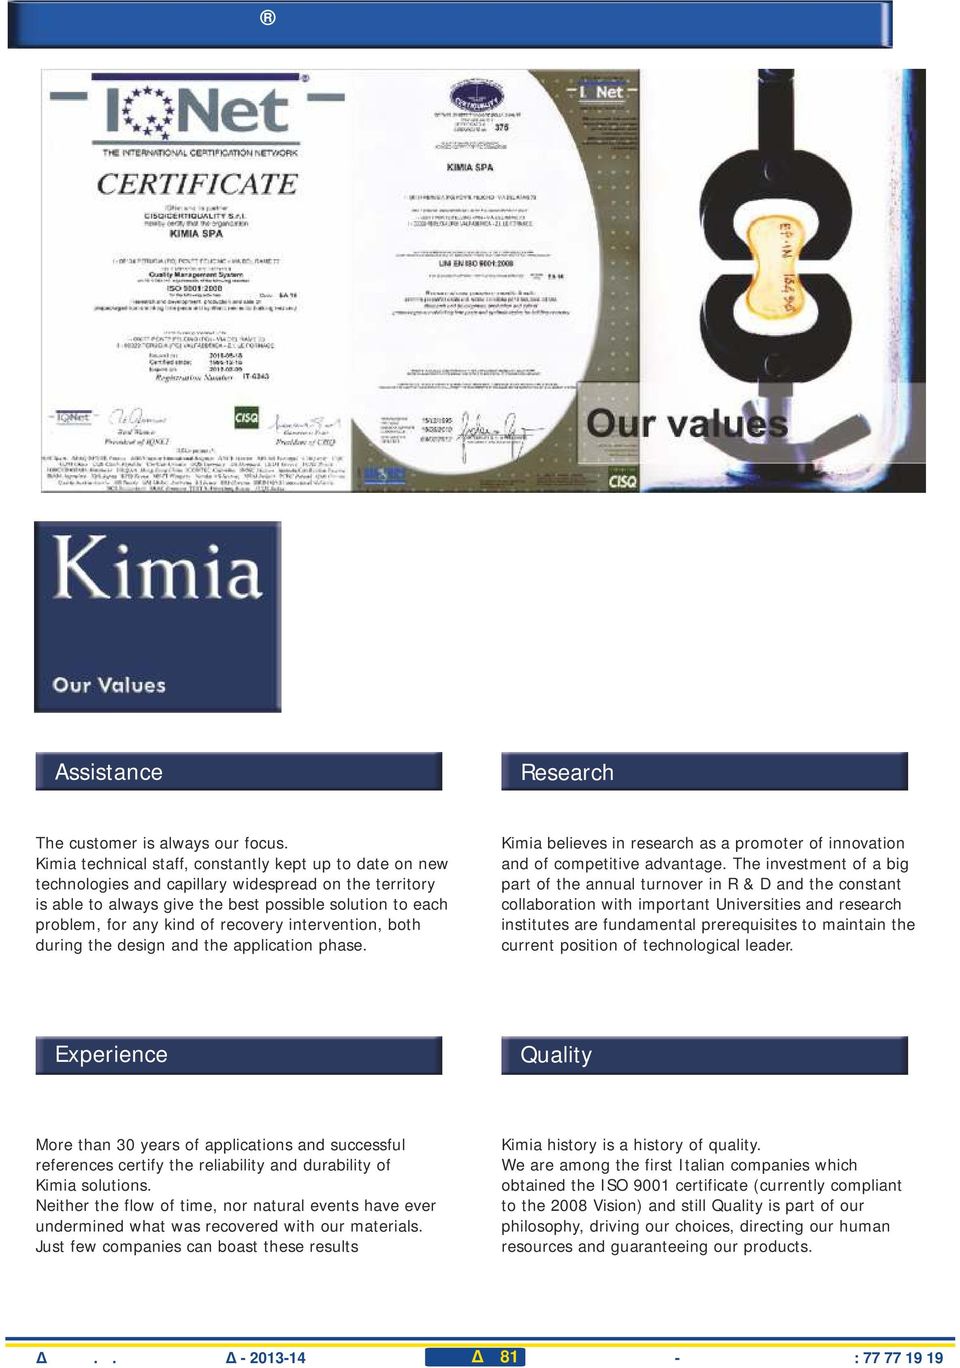 recovery intervention, both during the design and the application phase. Kimia believes in research as a promoter of innovation and of competitive advantage.